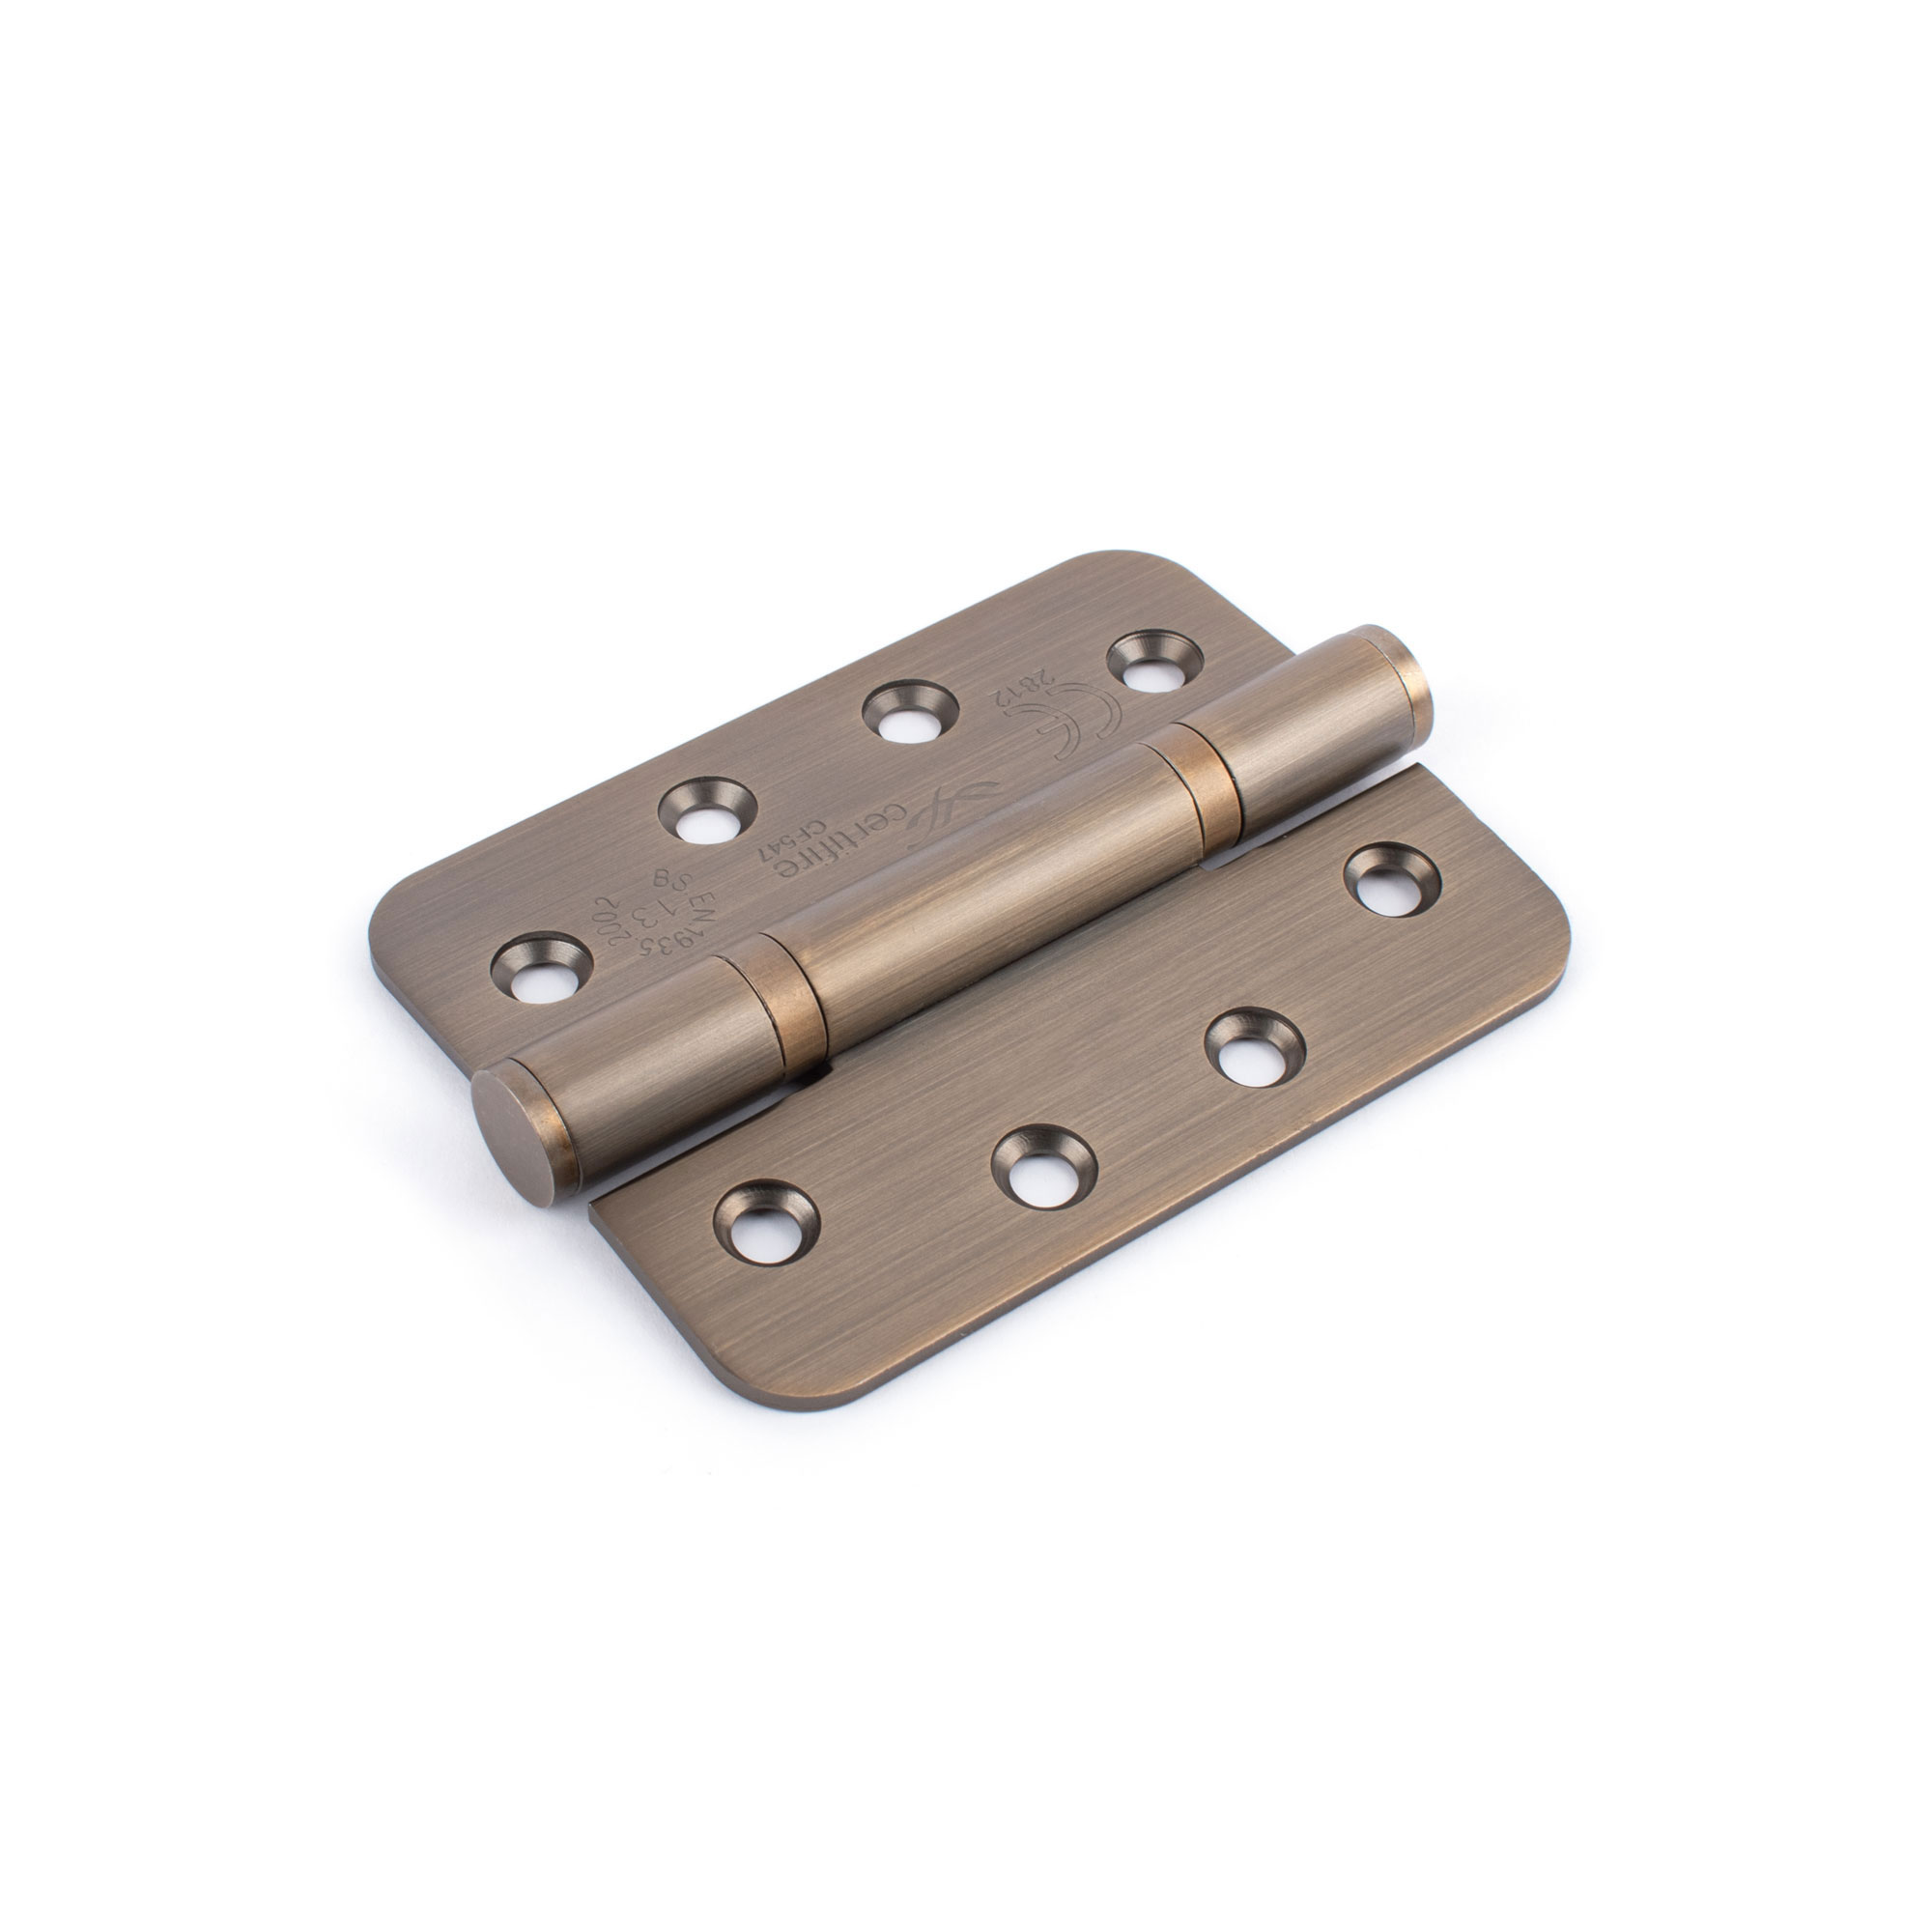 Sox Atom 4 Inch Stainless Steel Hinges Radius Edge (3 Pack) - Antique Brass